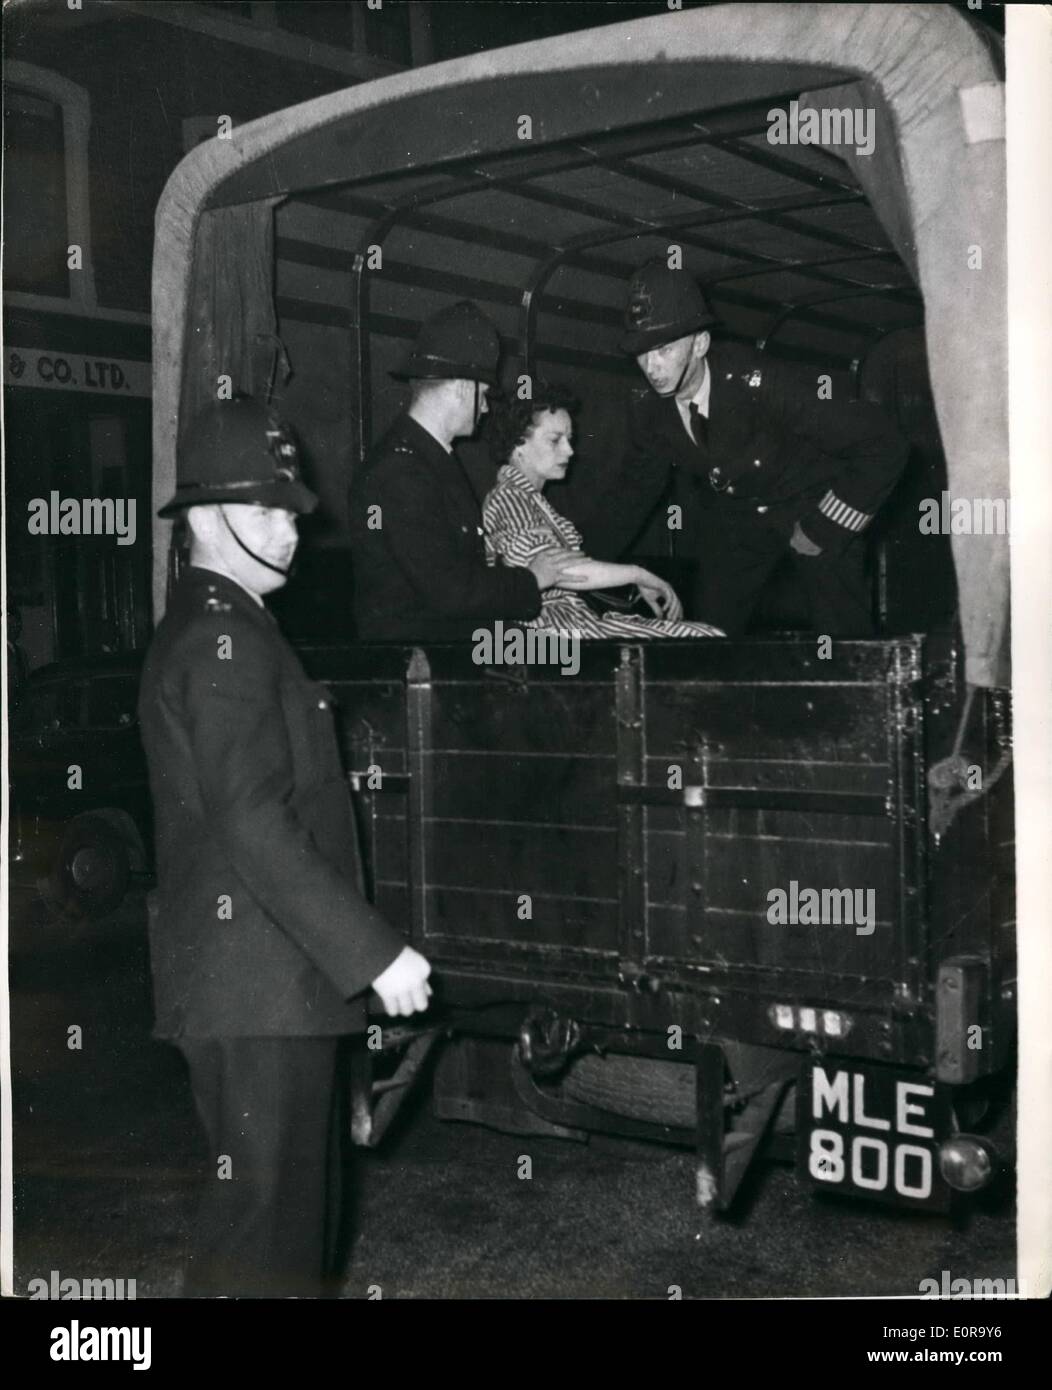 Sep. 09, 1958 - Black - White racial riots once again in Notting Hill Gate. Woman in a Police van: Many arrests were made last night in the Black White racial riots which broke out again for the fourth night in succession in the Notting Hill Gate area of London. Photo shows a woman in a police wagon after the riots in Blenheim Crescent, Notting Hill Gate last night. Stock Photo